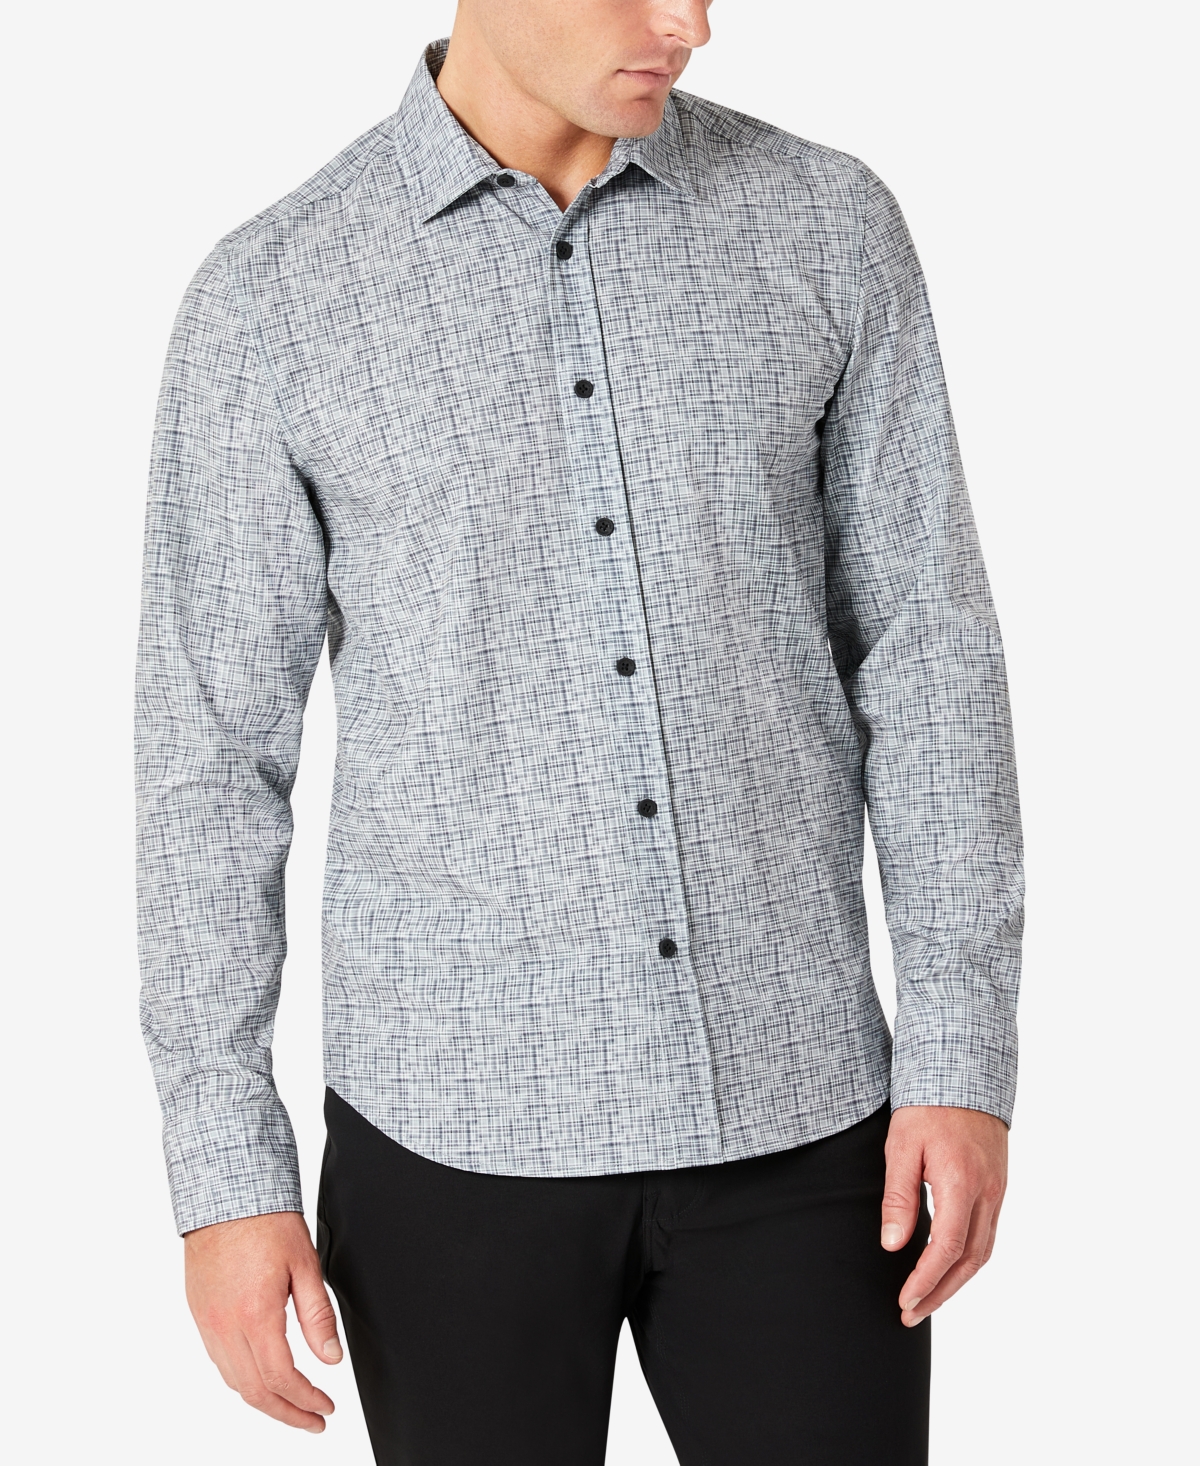 Kenneth Cole Men's Slim Fit Performance Shirt In Charcoal Plaid